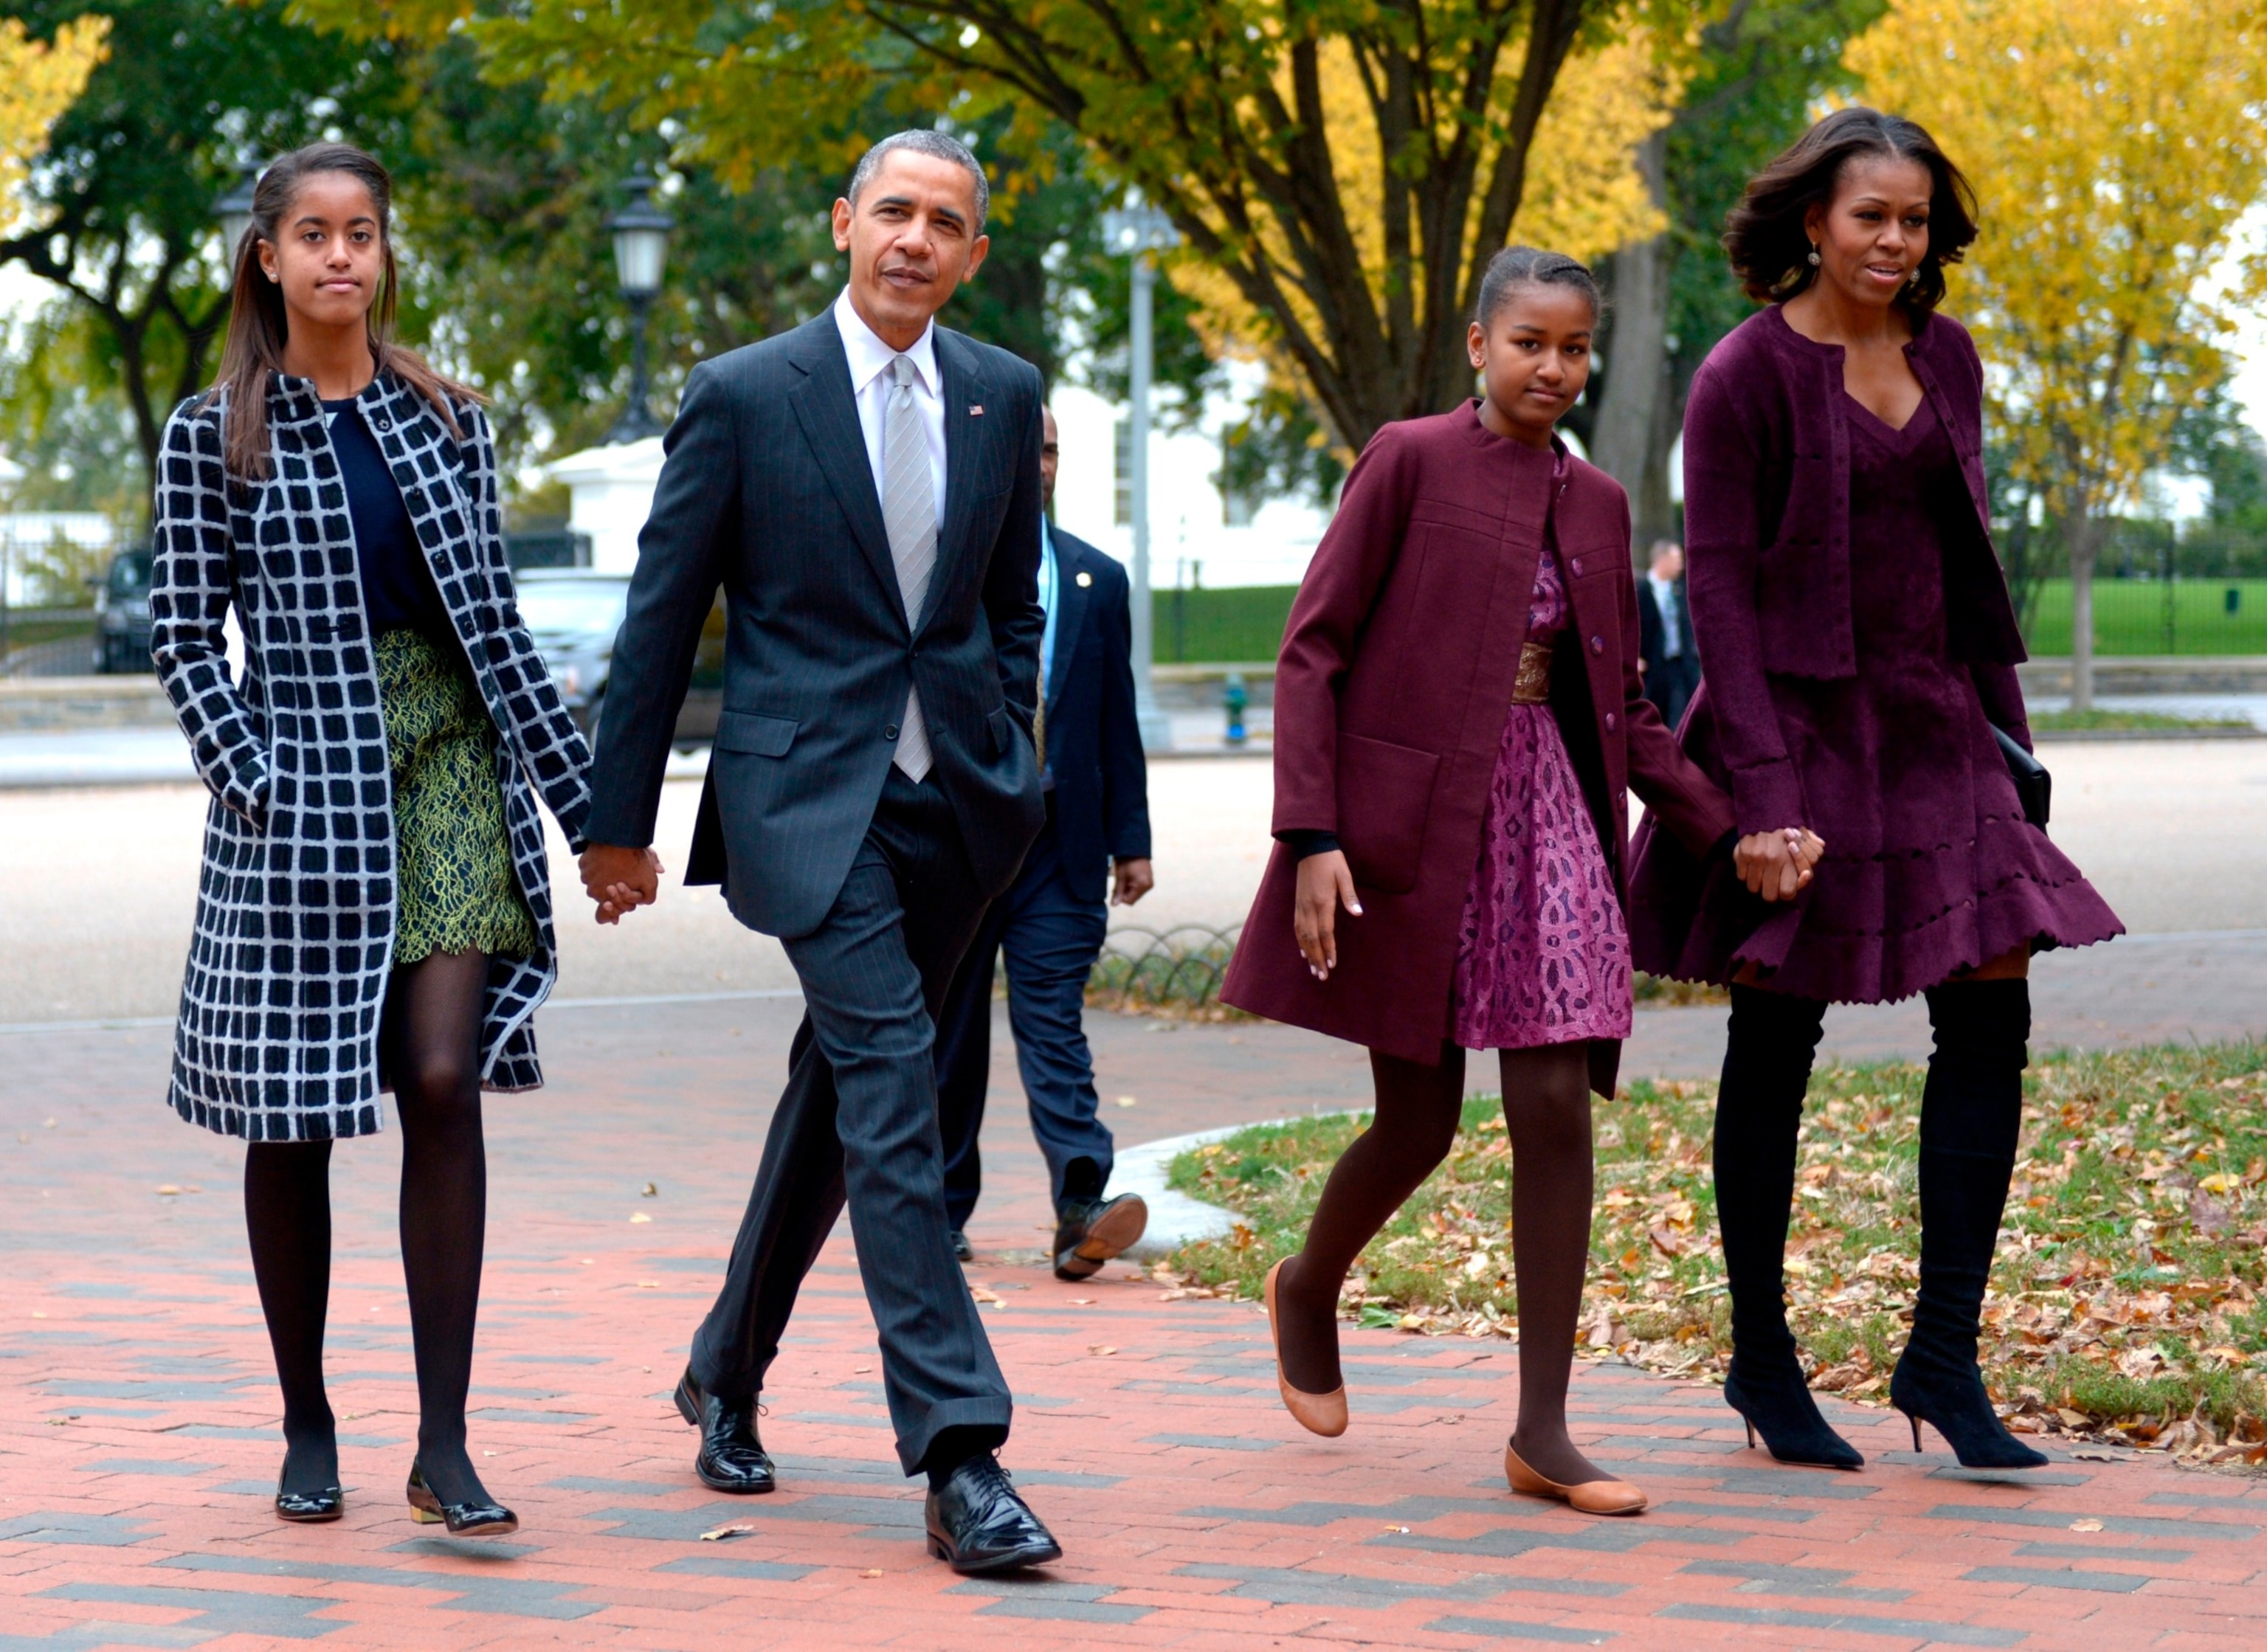 PHOTO: President Barack Obama walks with his wife Michelle Obama, and two daughters Malia Obama and Sasha Obama, through Lafayette Park to St John's Church to attend service October 27, 2013 in Washington, DC.